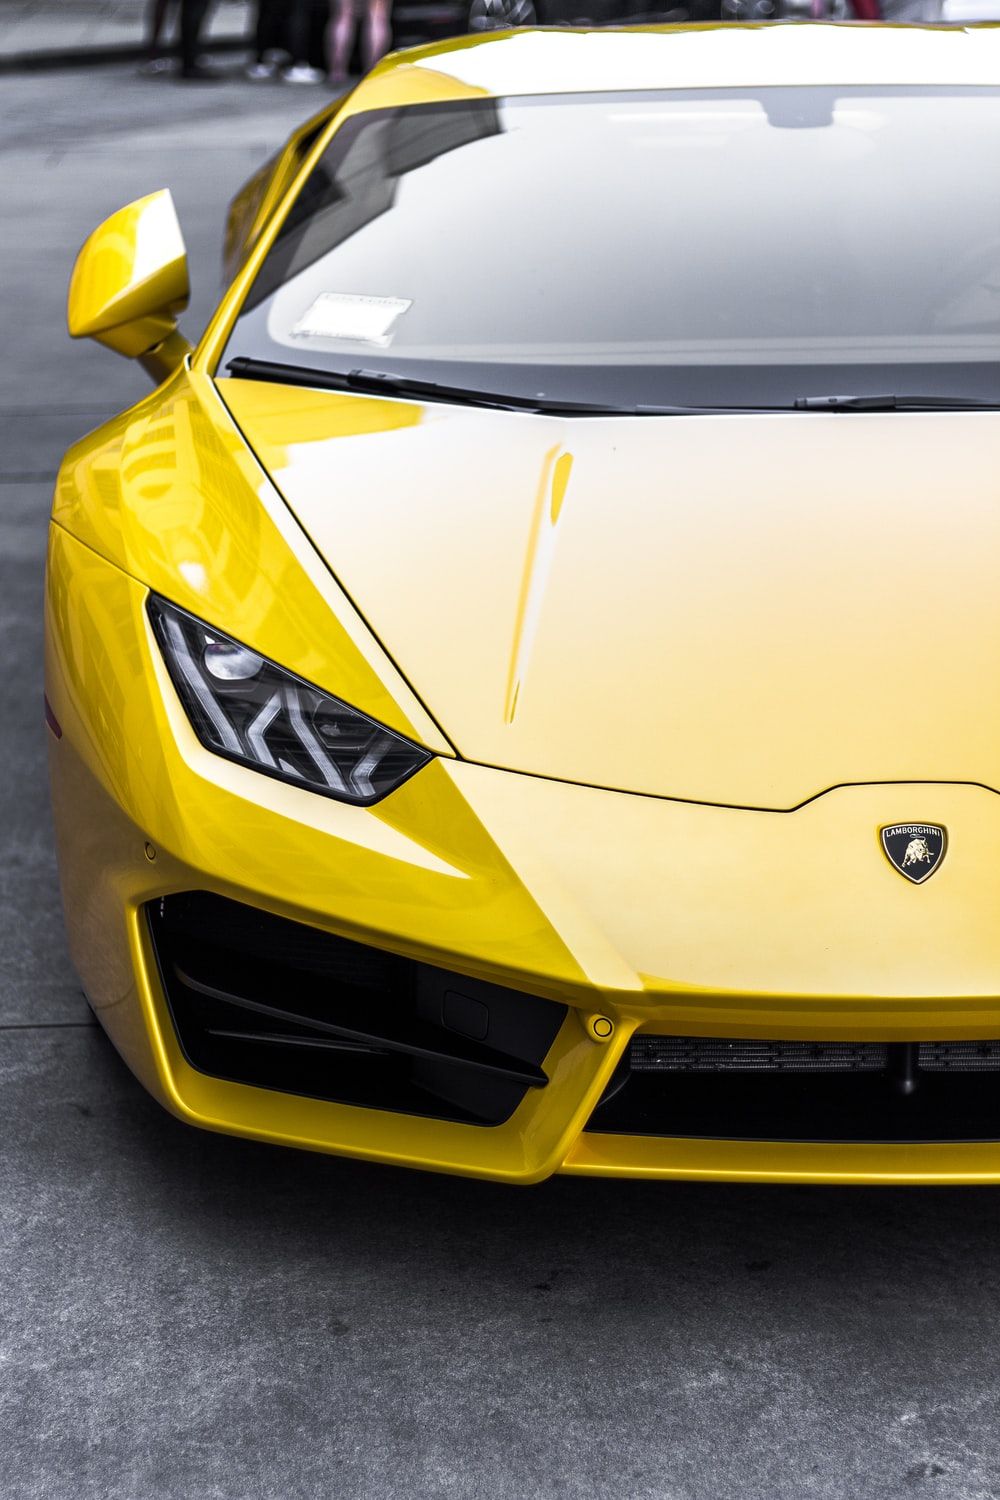 Rich Car Picture. Download Free Image